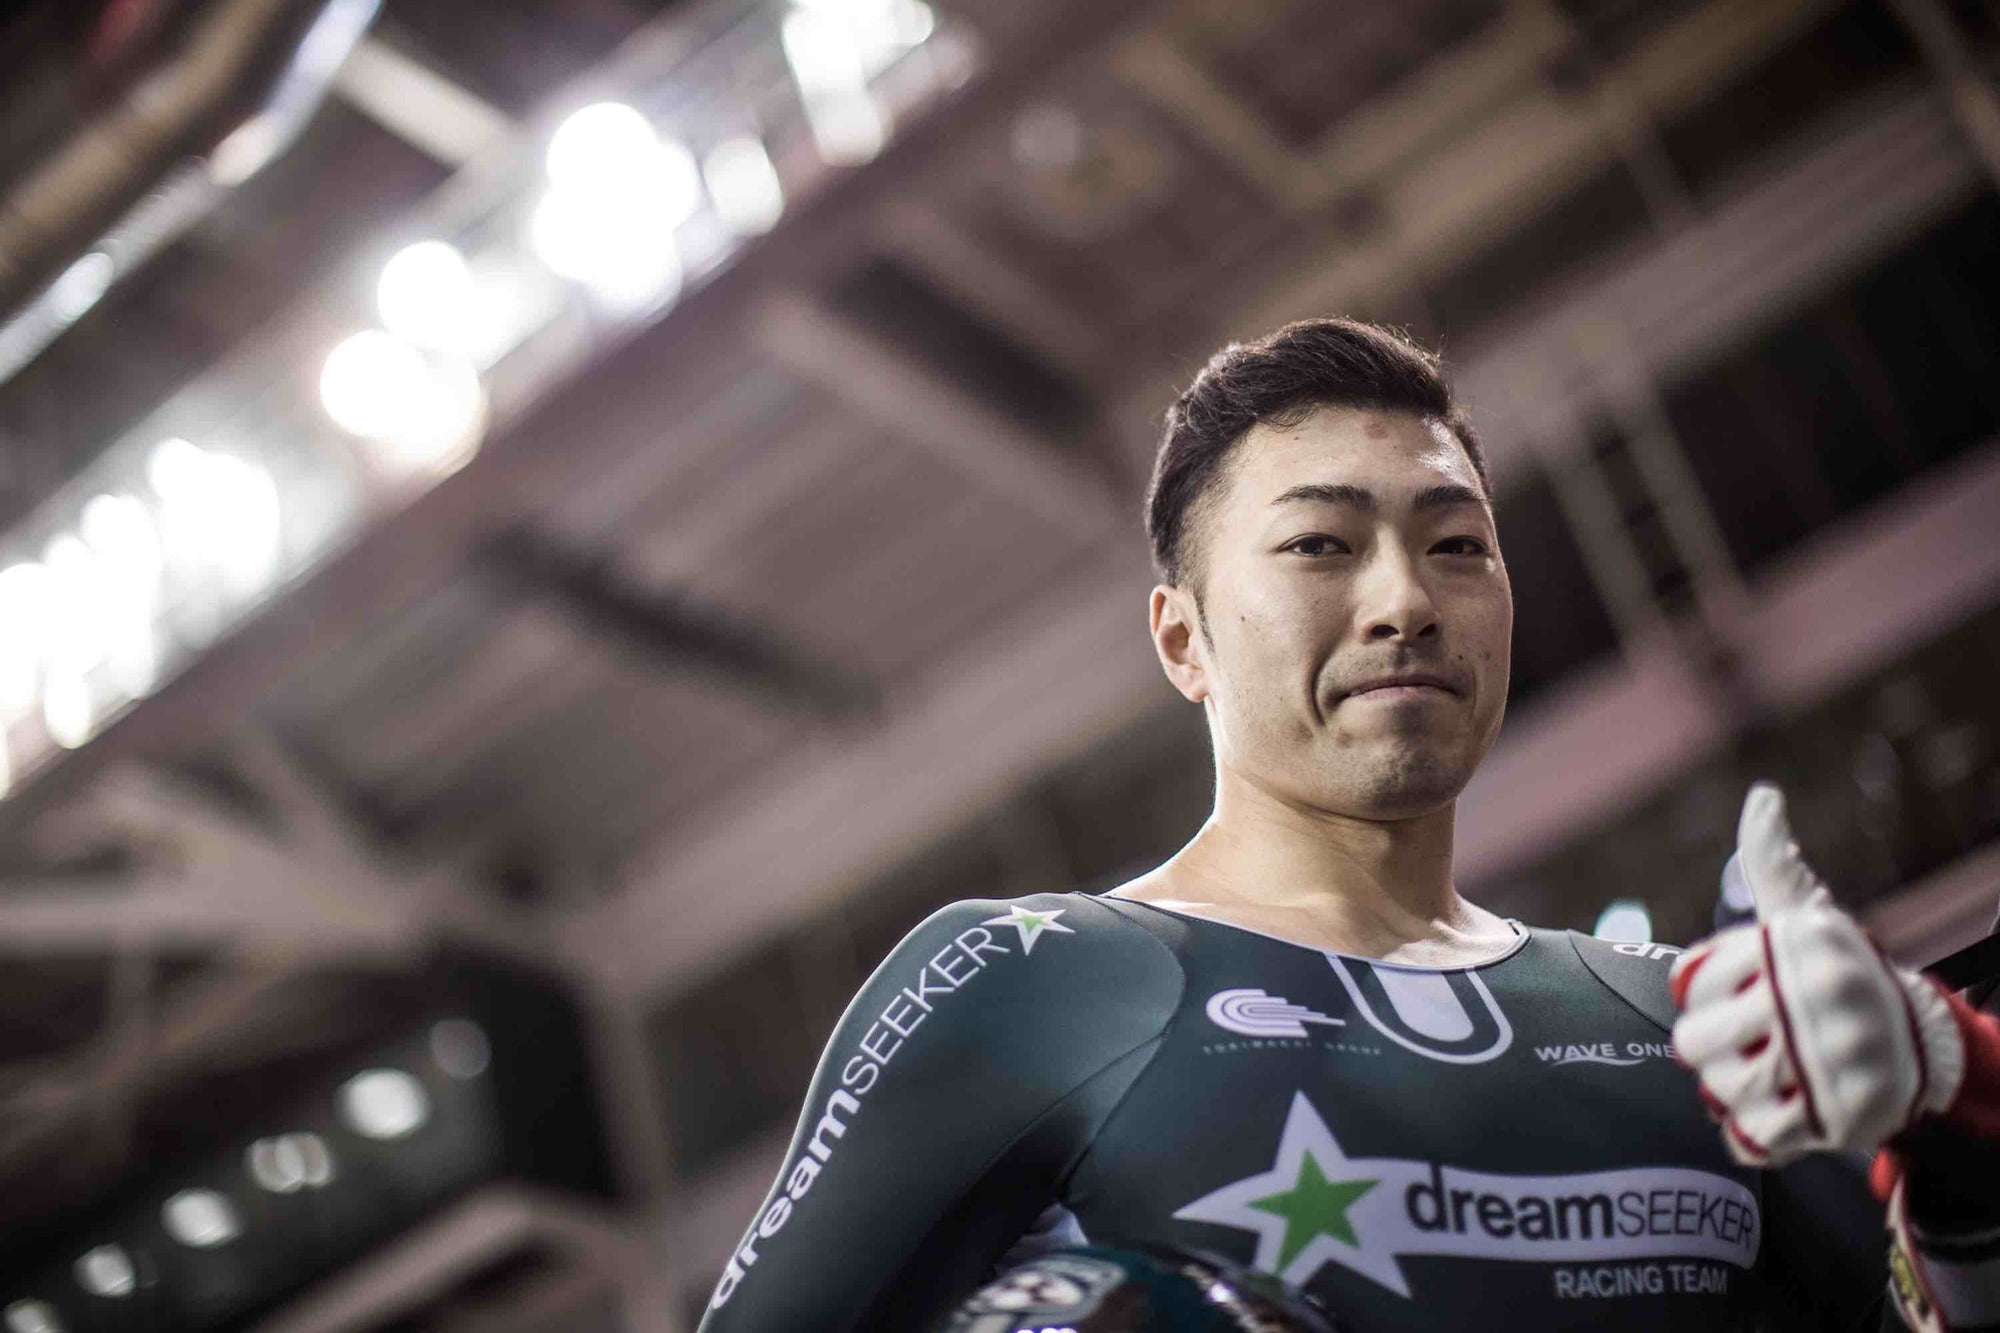 Dream Seeker at Glasgow Round of UCI Track Cycling World Cup - Chris Auld